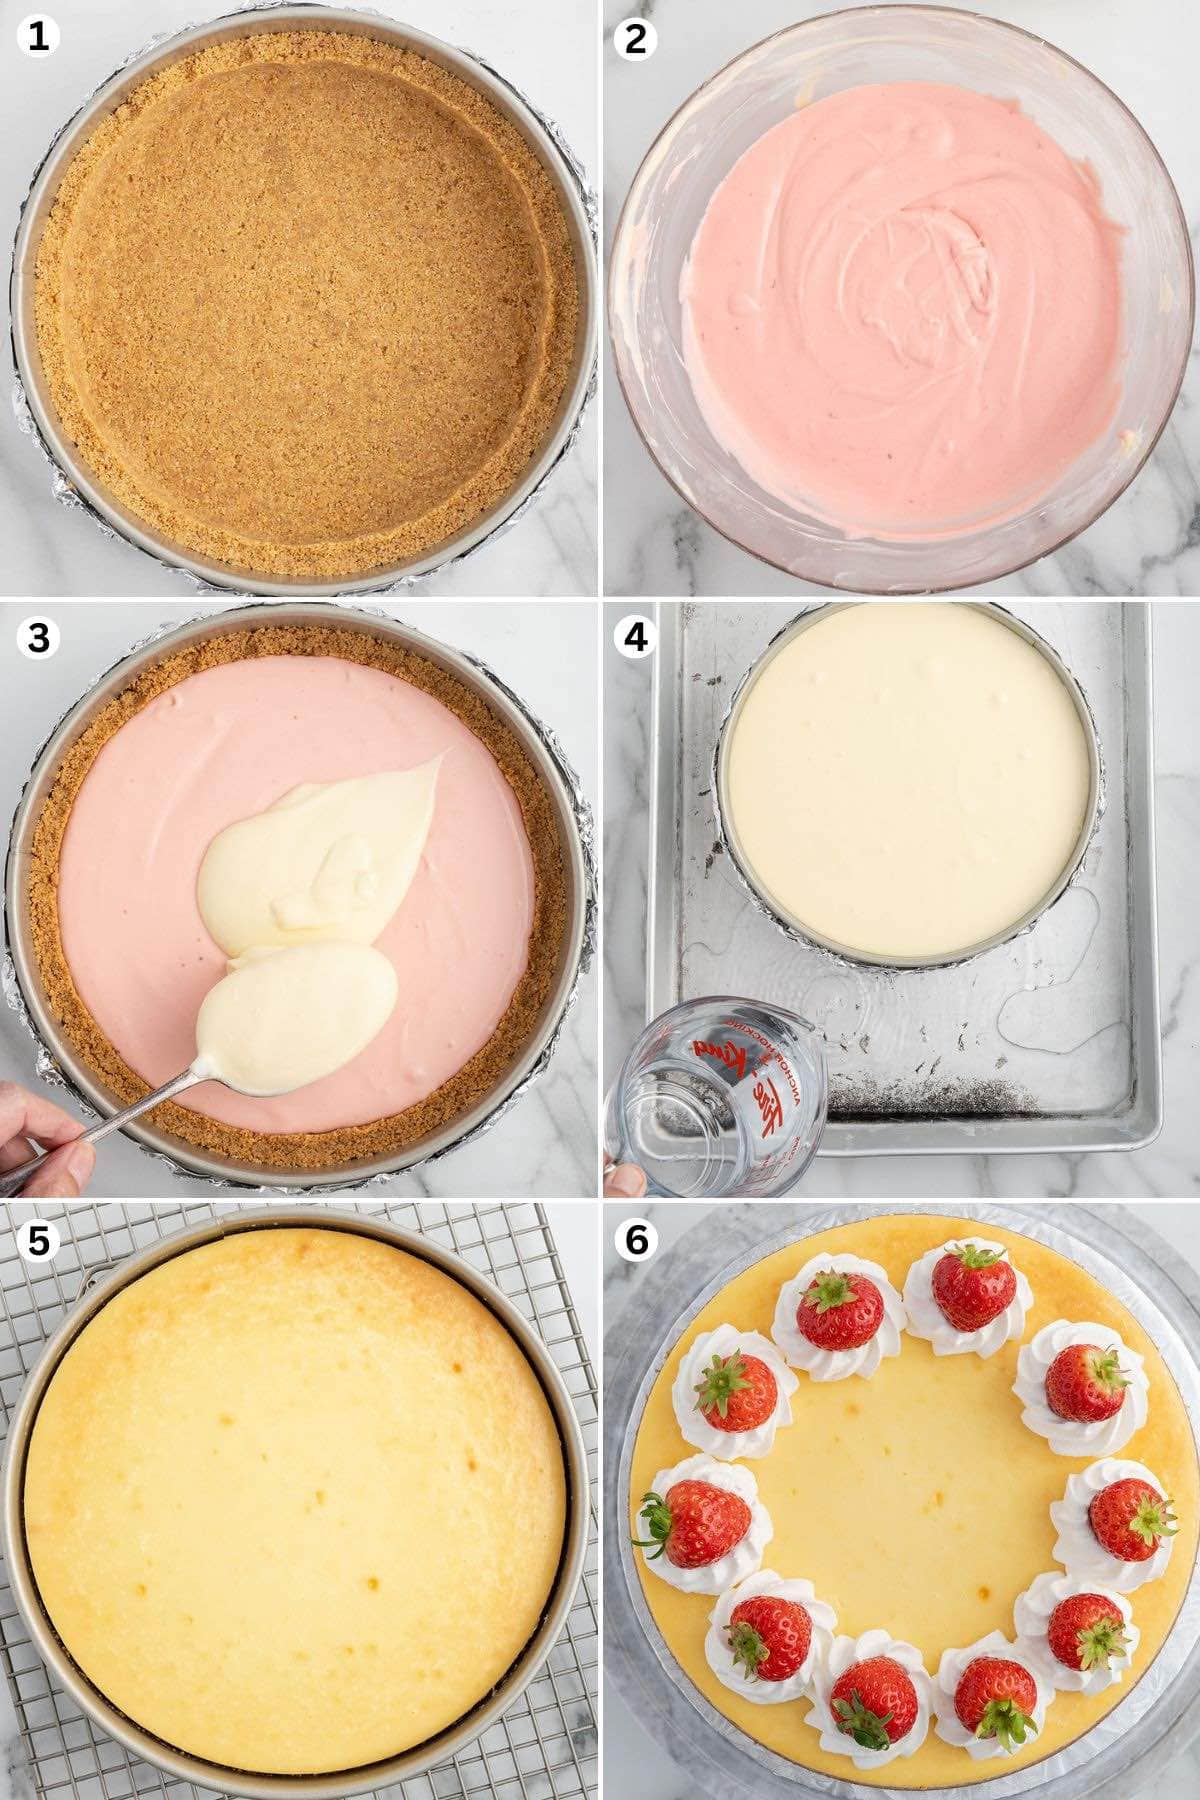 Create the crust. Prepare the cheesecake filling. Spread the strawberry-flavored cheesecake batter and top with the plain cheesecake batter. Water bath the cheesecake and bake. Garnish the cheesecake with whipped topping and strawberries.